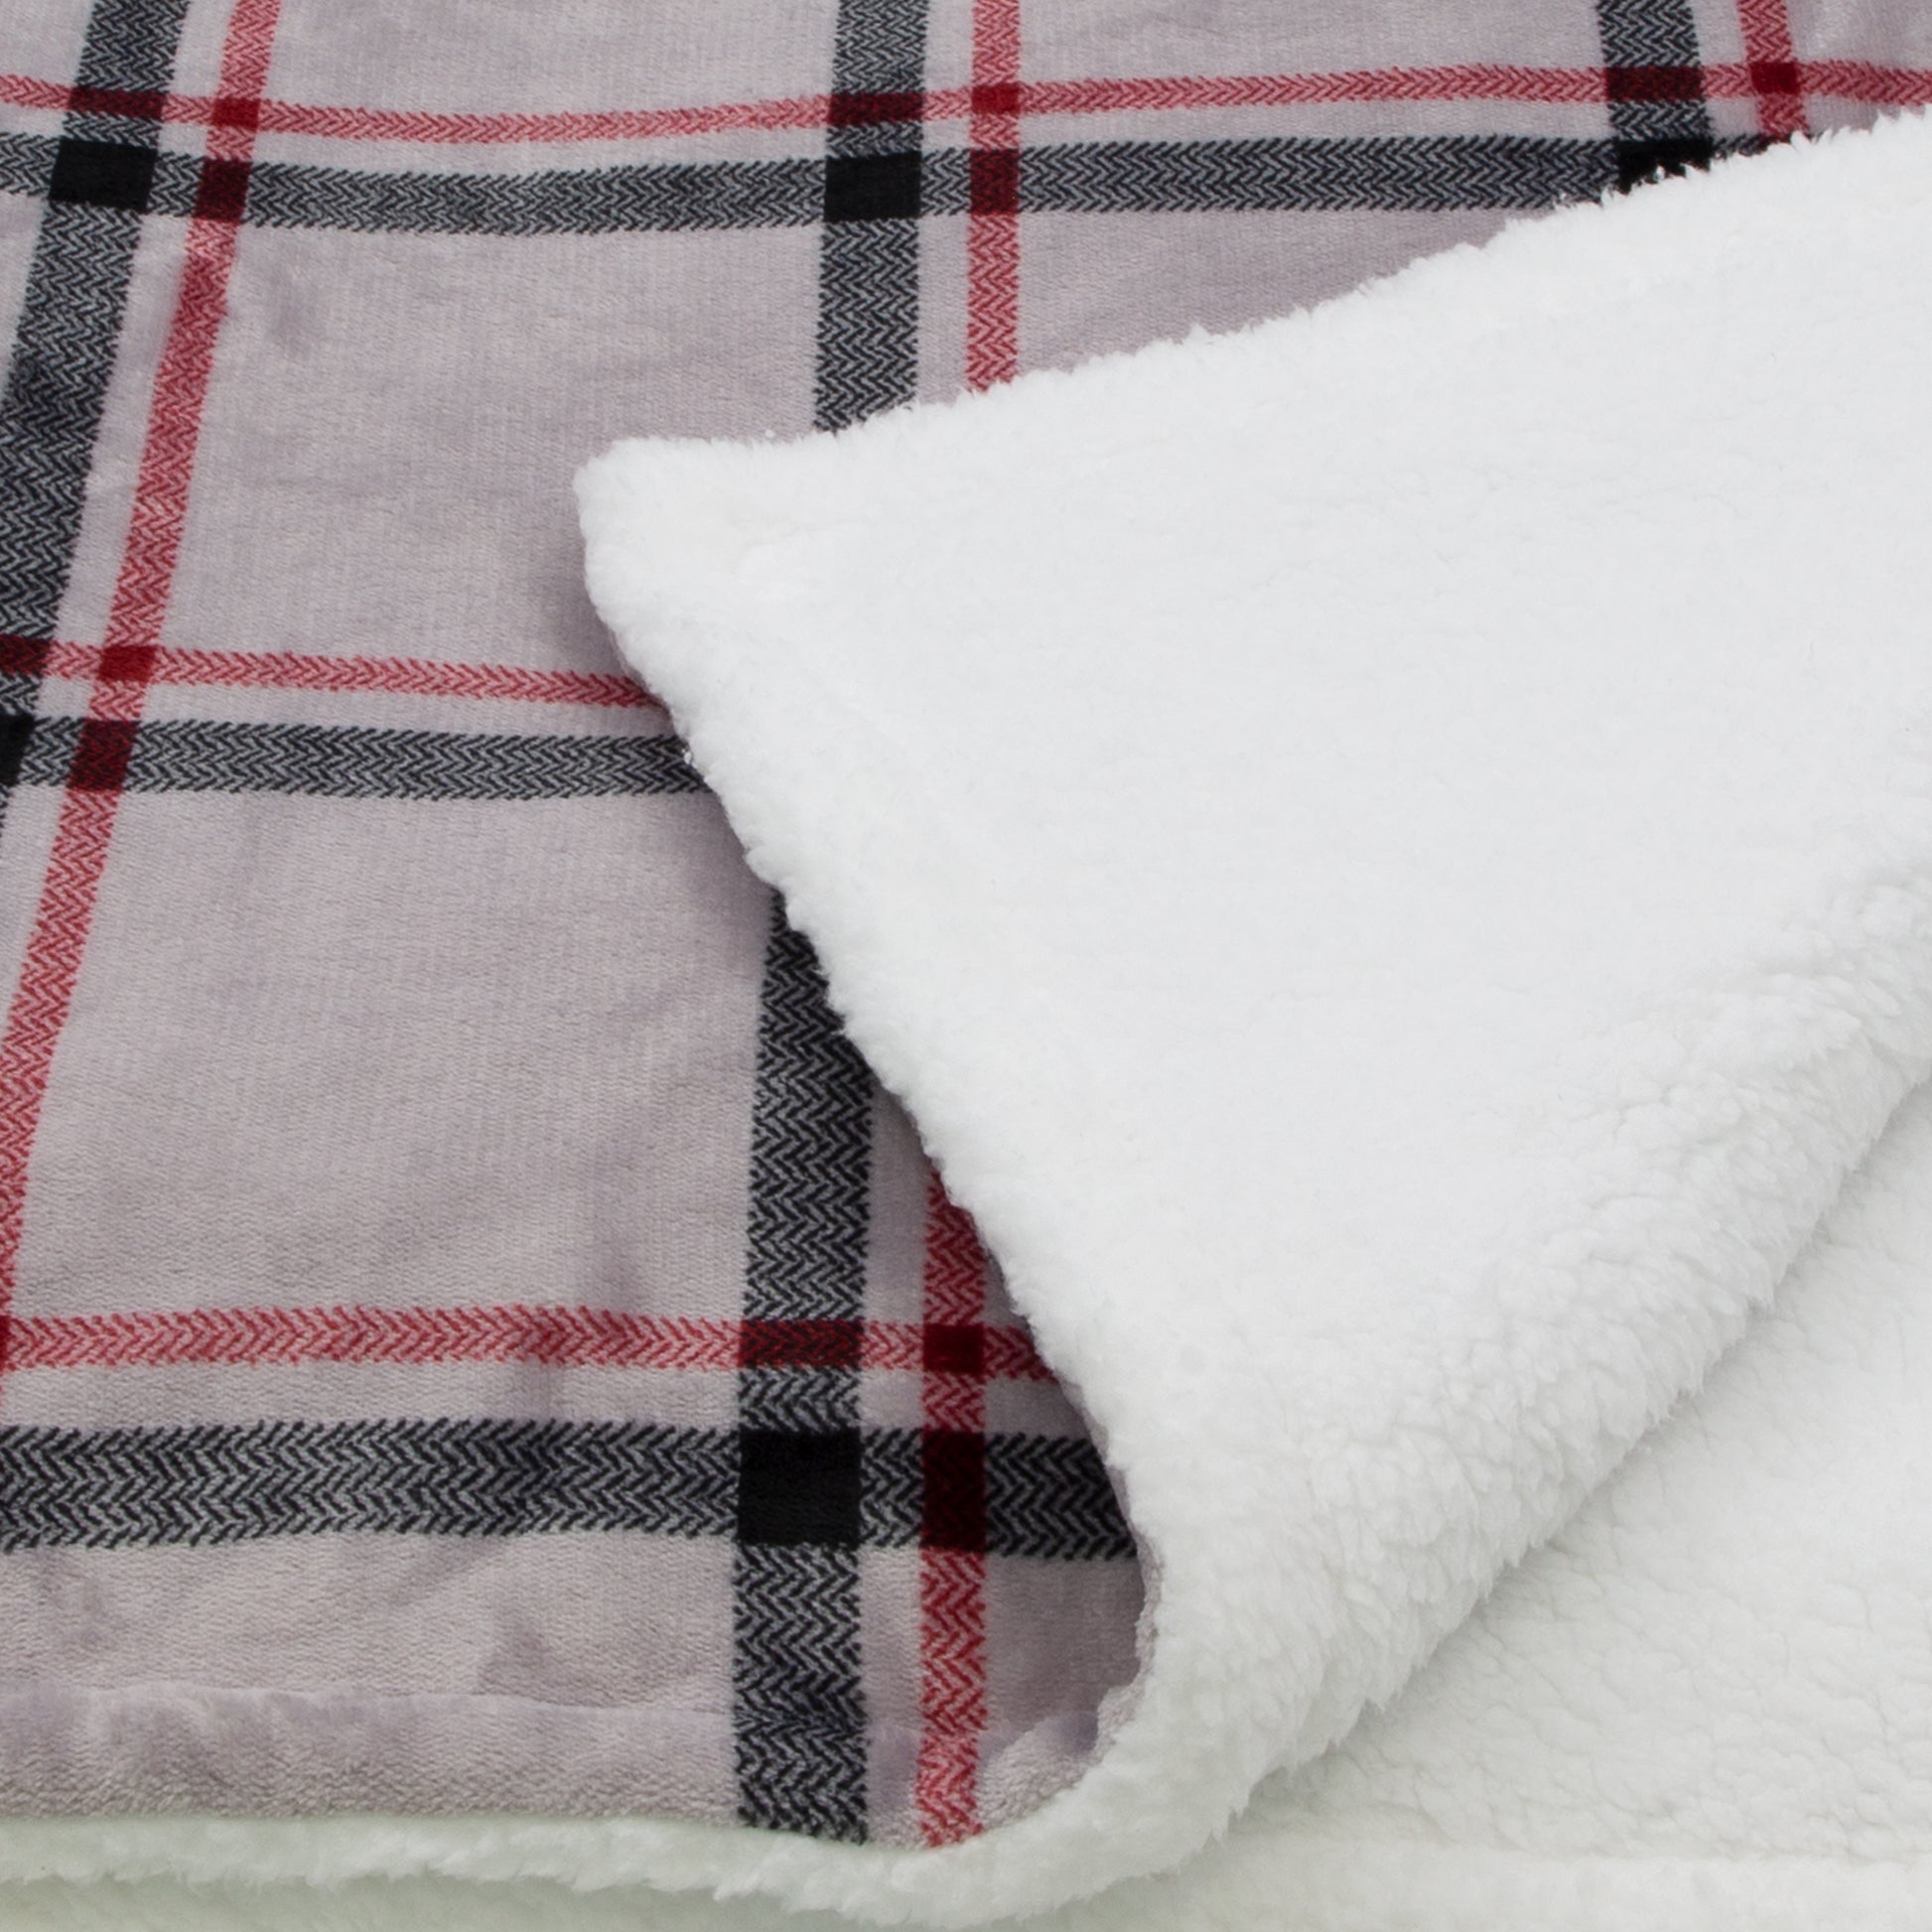 Bauer Luxury Soft Touch Heated Electric Throw Plaid